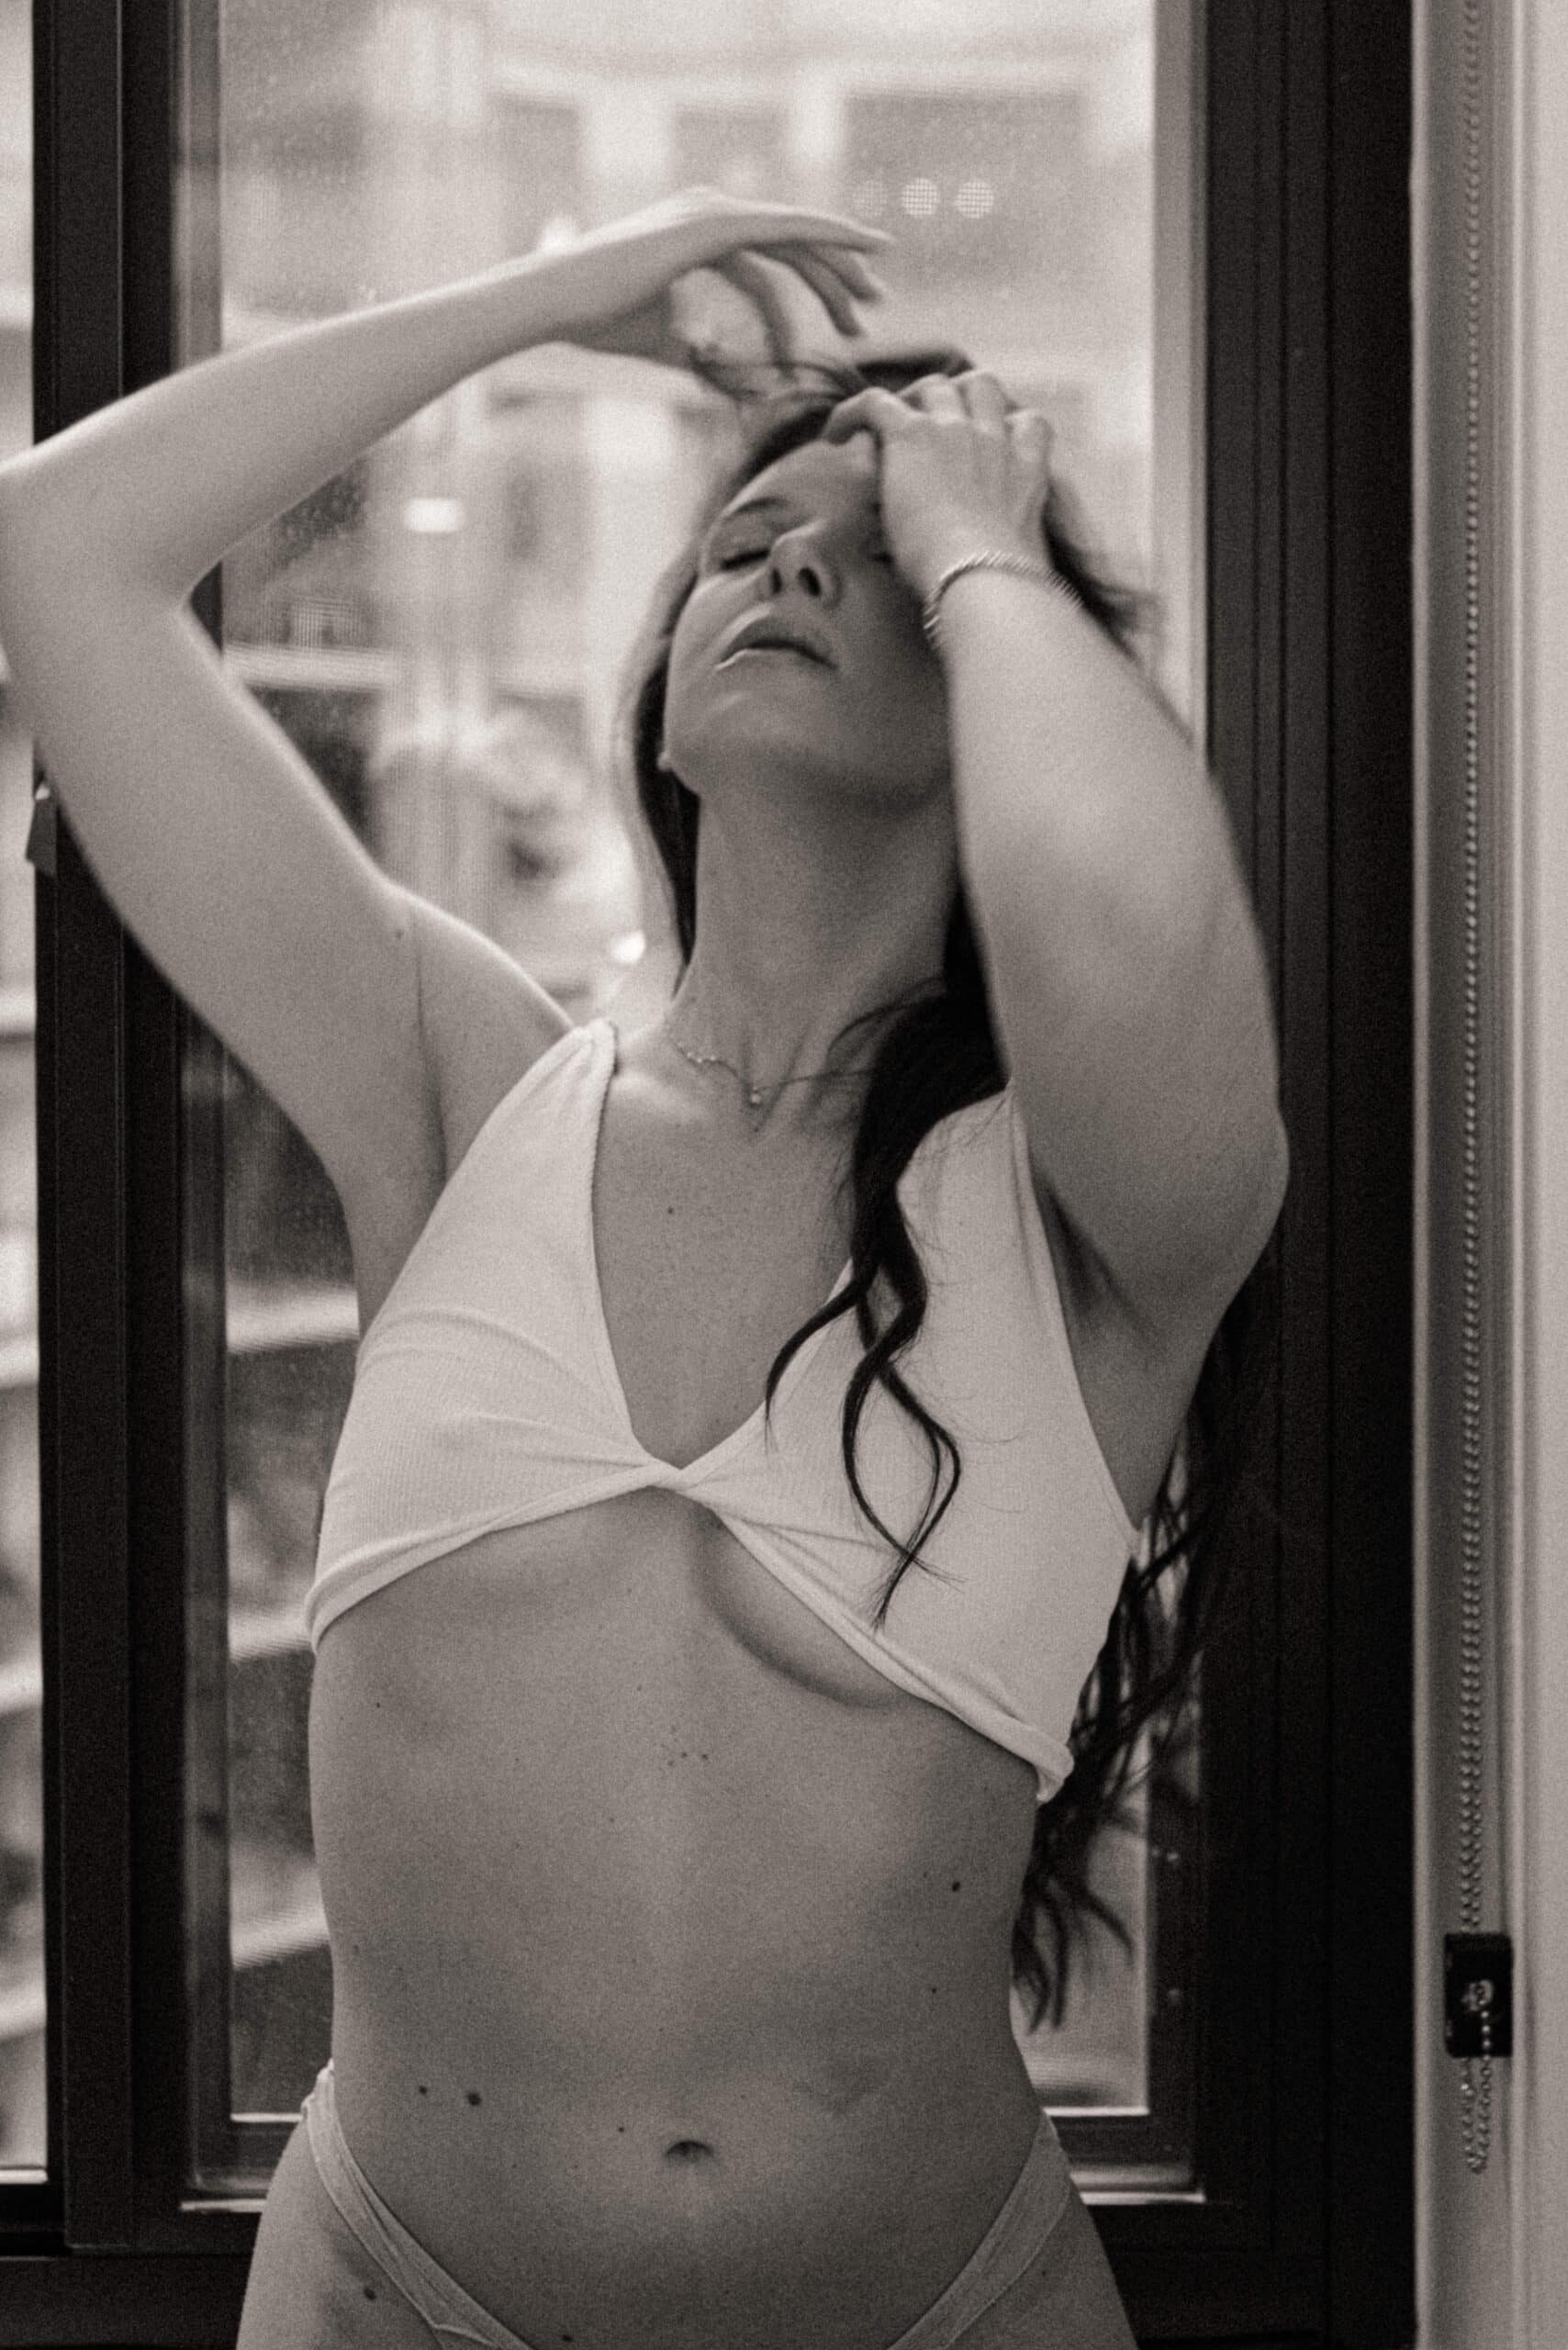 Close-up B&W photo of a woman in underwear with motion-blurred hand in hair by window